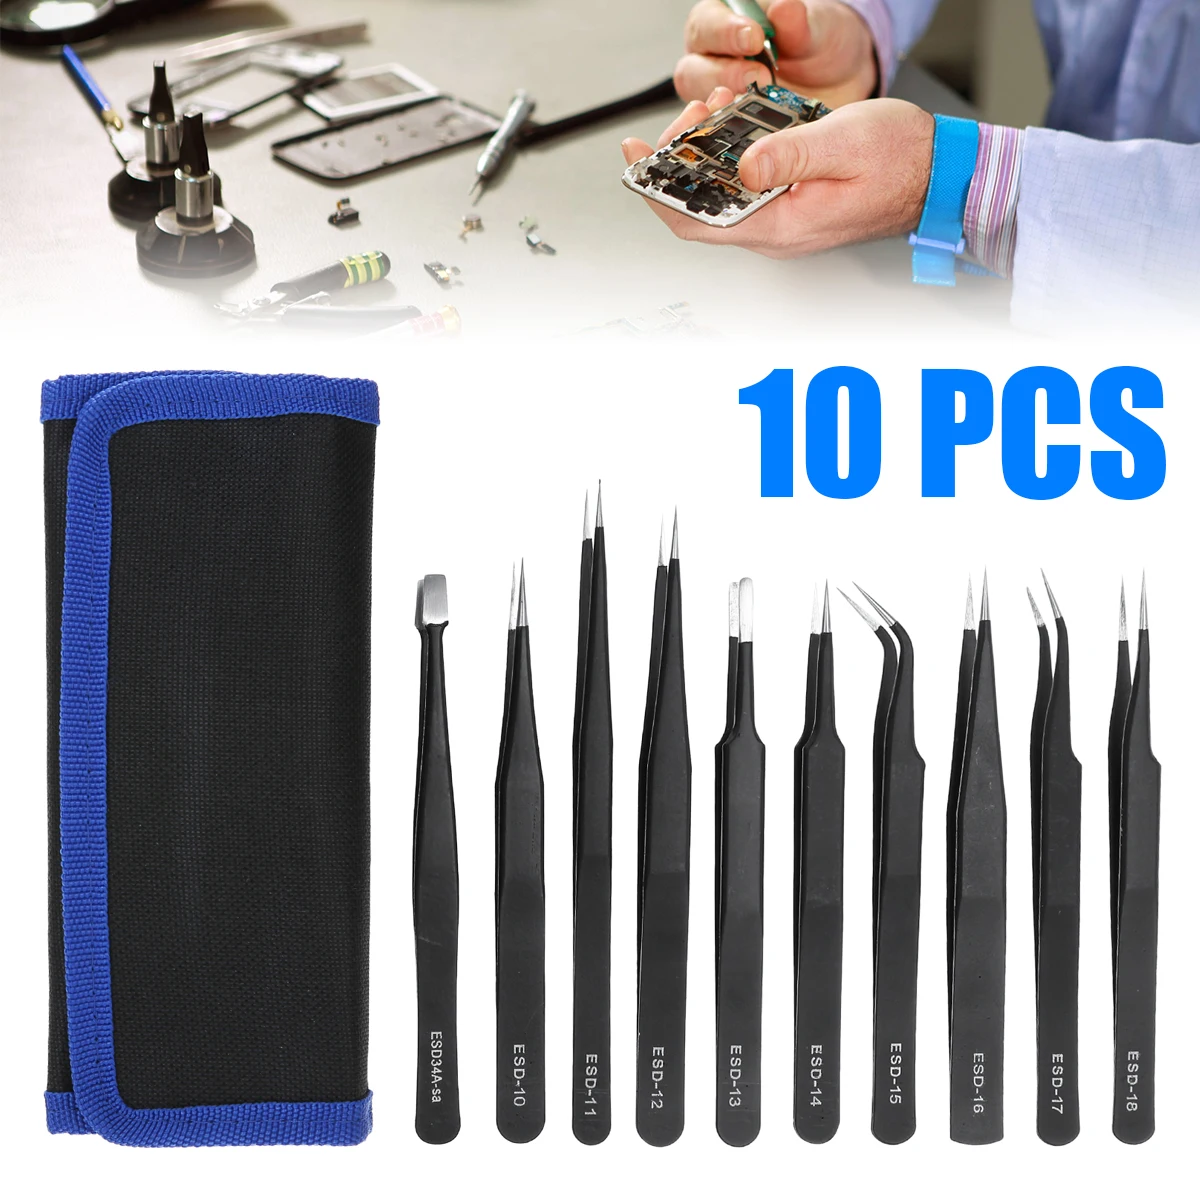 

10PCS Professional Coated Precision ESD Non-Magnetic Stainless Steel Tweezers Set For SMD Chip Electronic Repairing